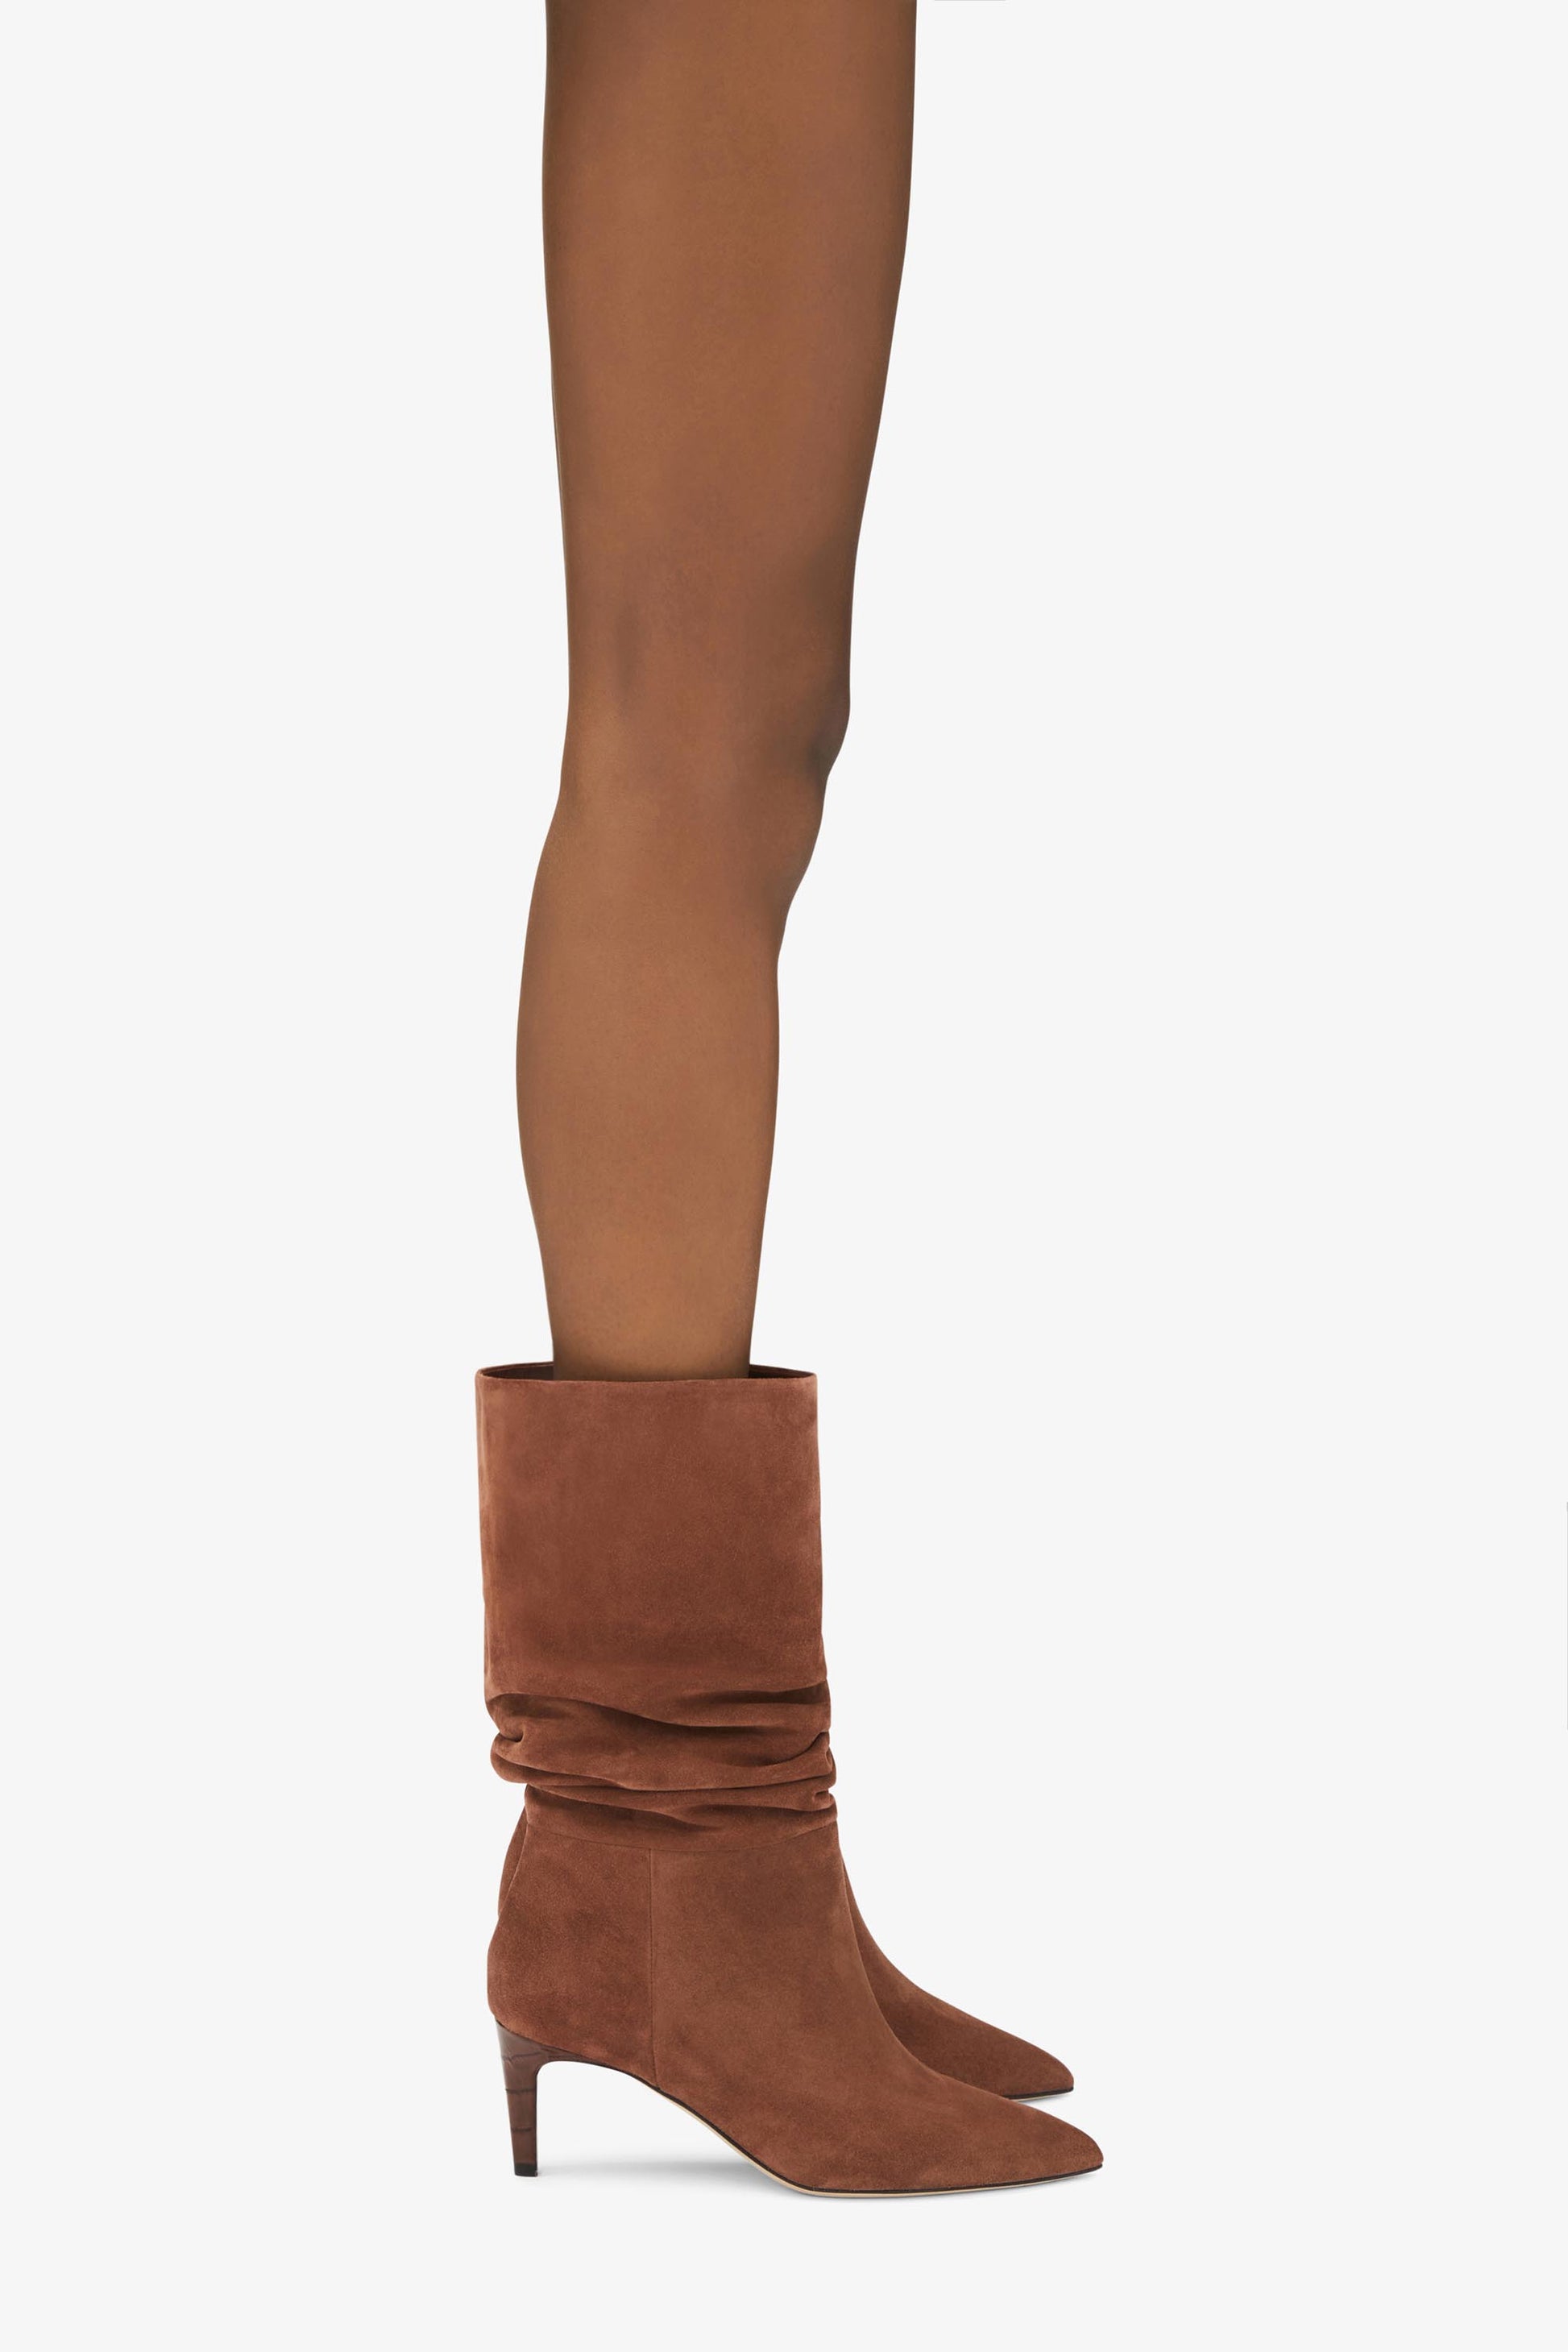 Canyon brown calf suede heel 60 slouchy boots - Product worn